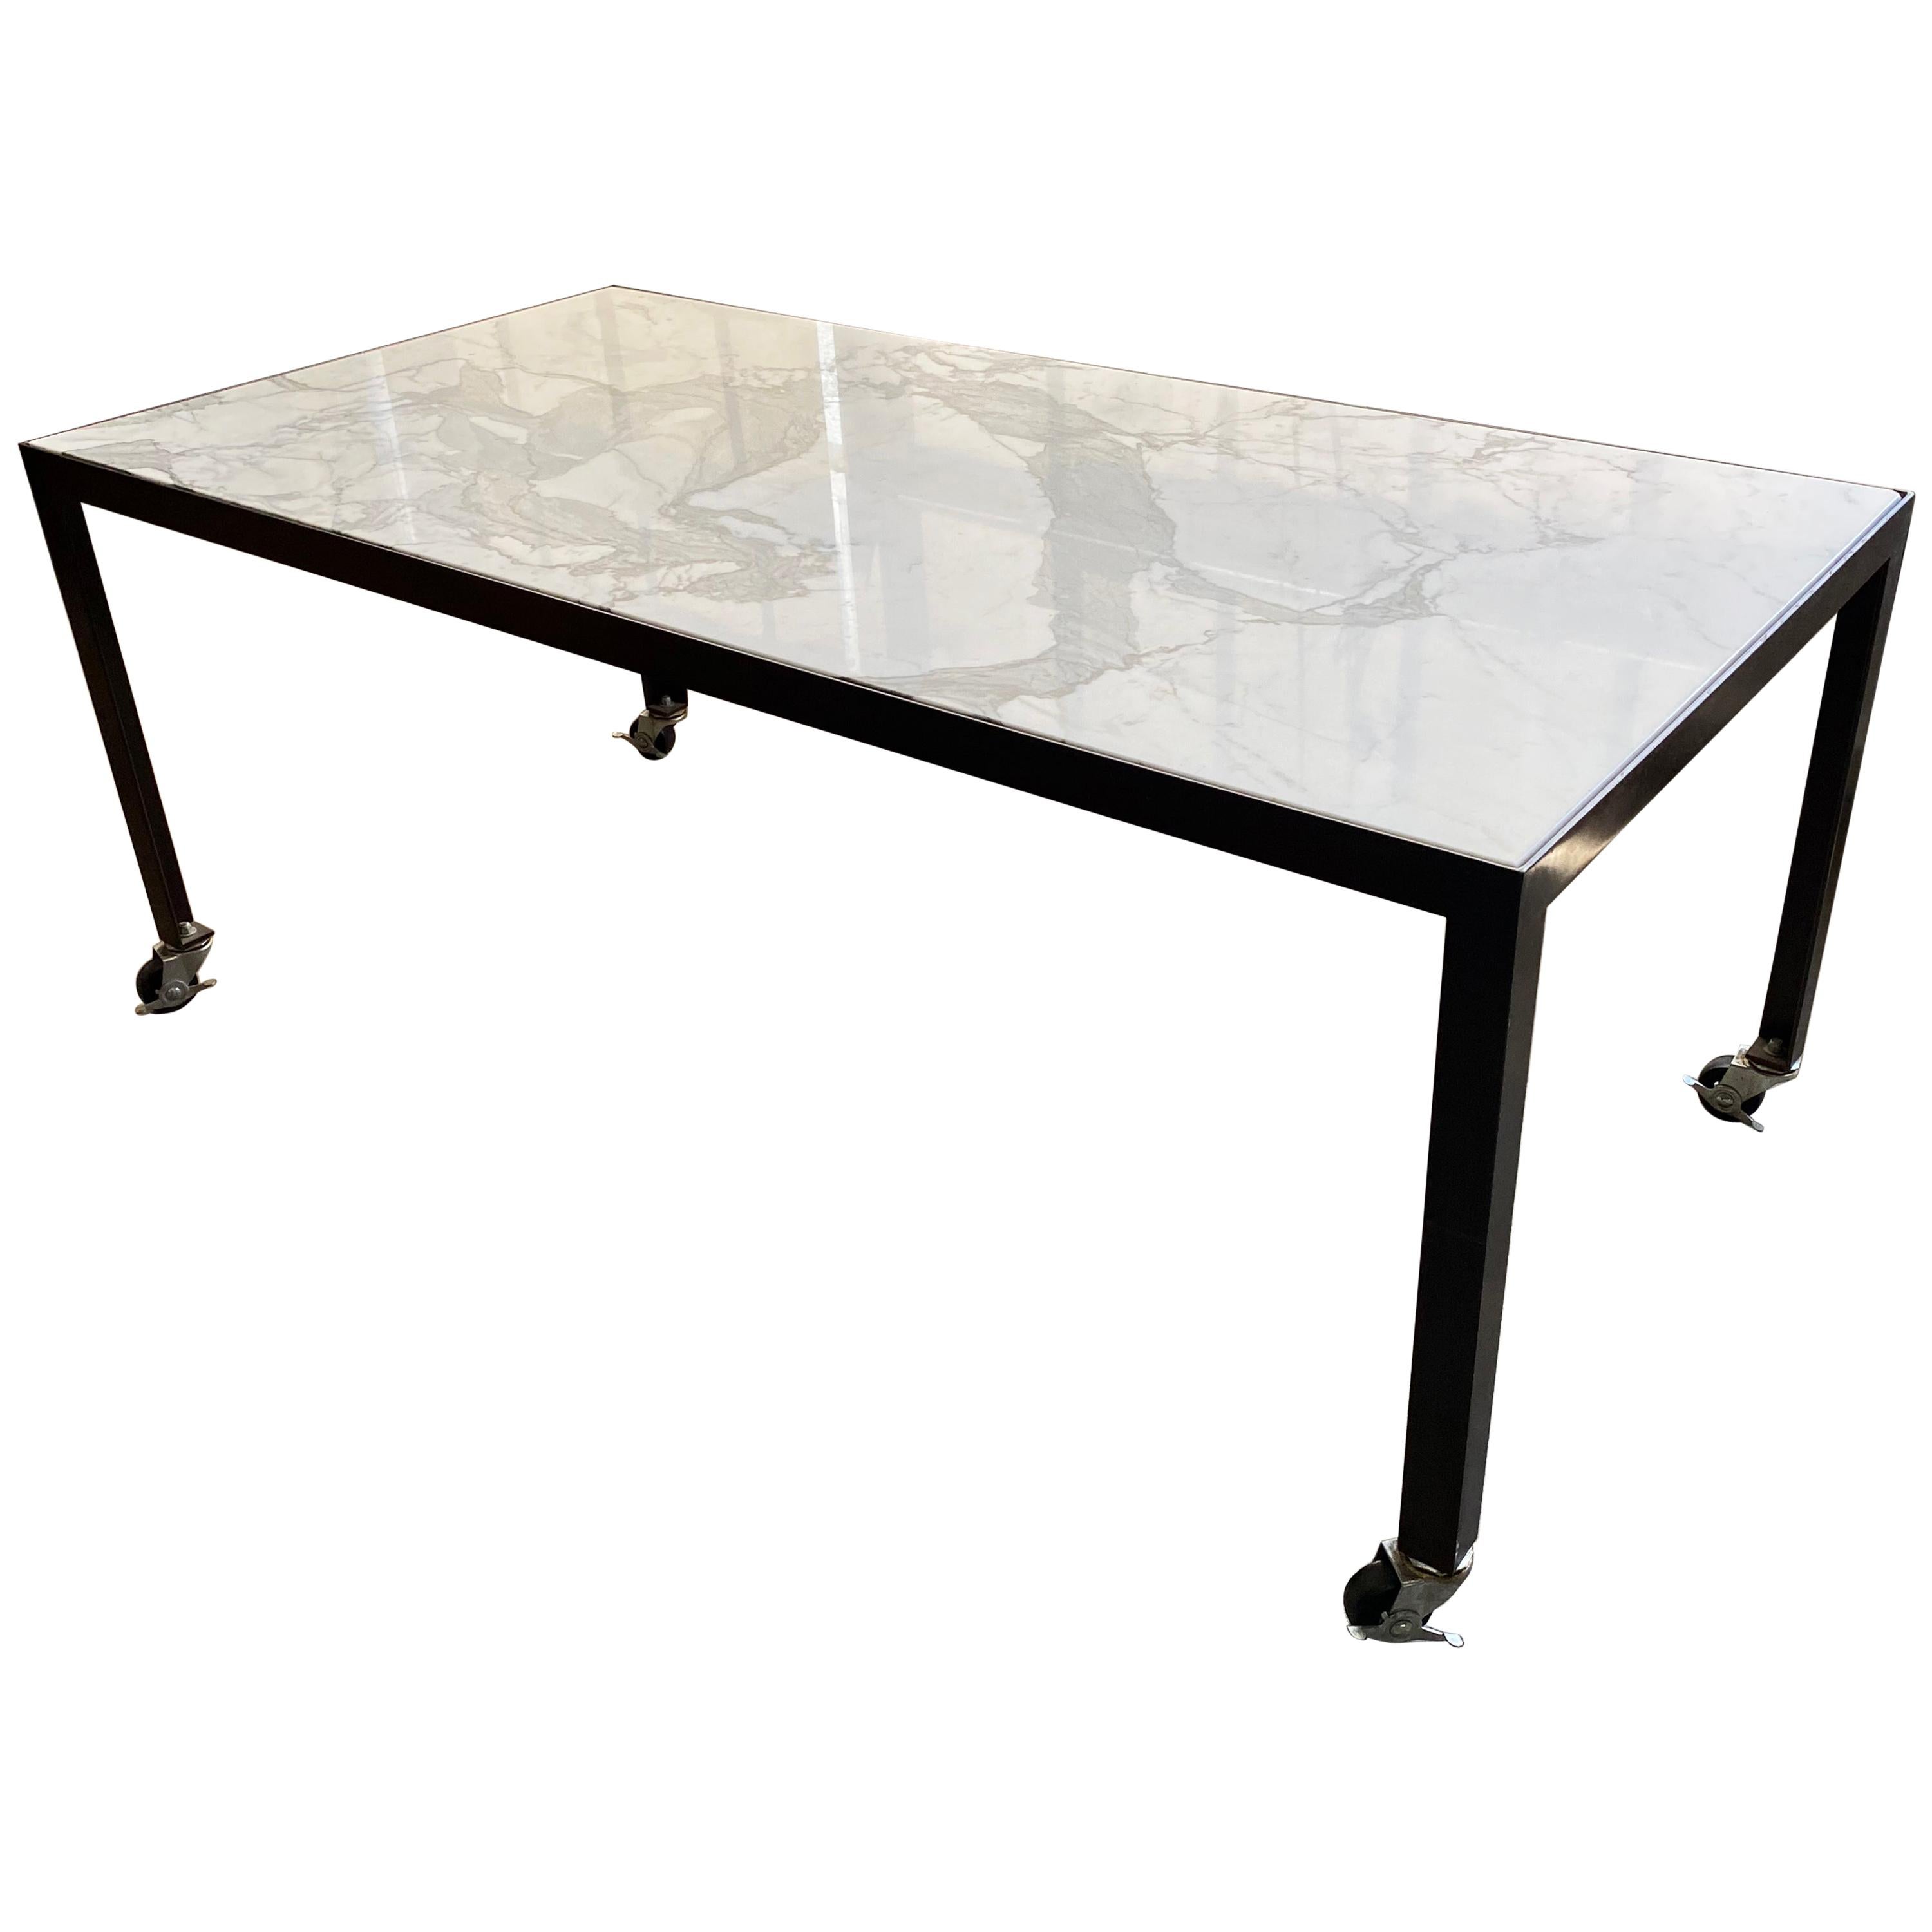 Originally designed by Javier Robles for meetings, this mobile table can be used either in the home or workplace.

Custom made by local New York artisans.

Finishes
Calacatta marble
Blackened steel.
 